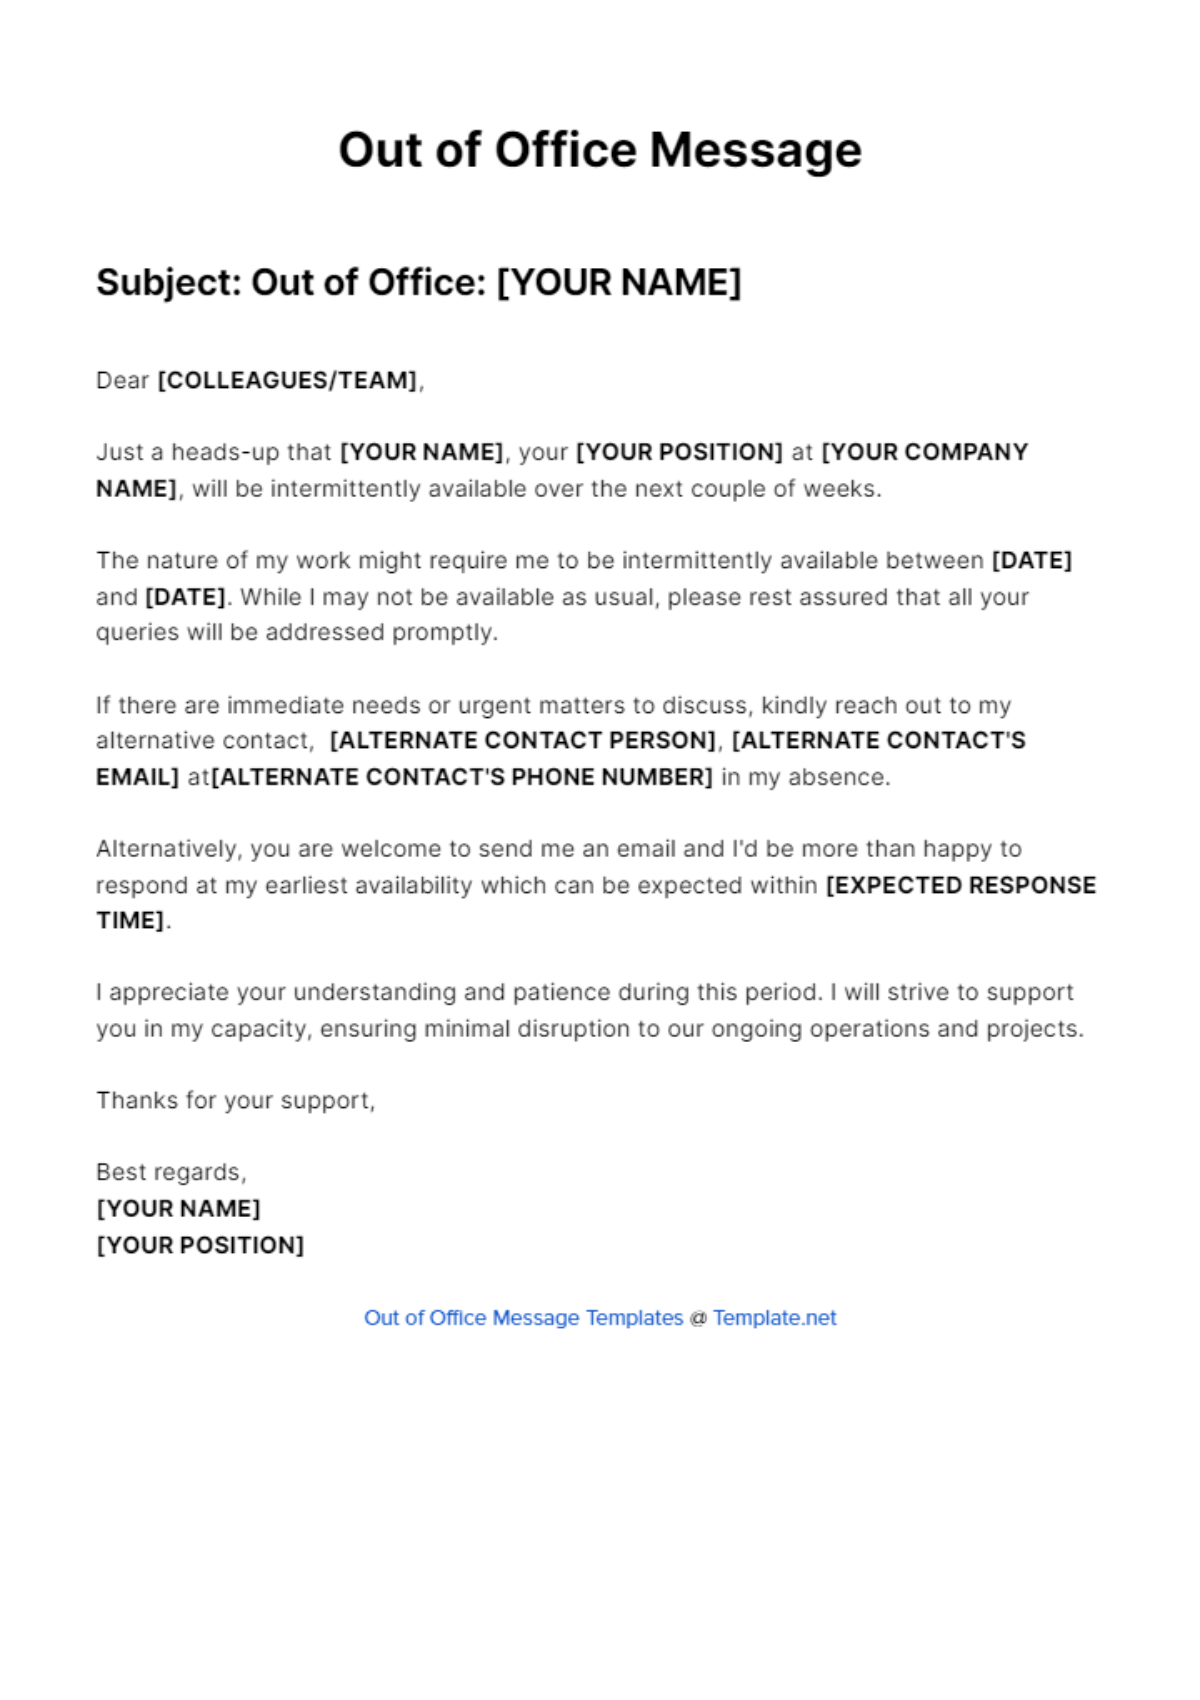 Working Intermittently Out Of Office Message Template